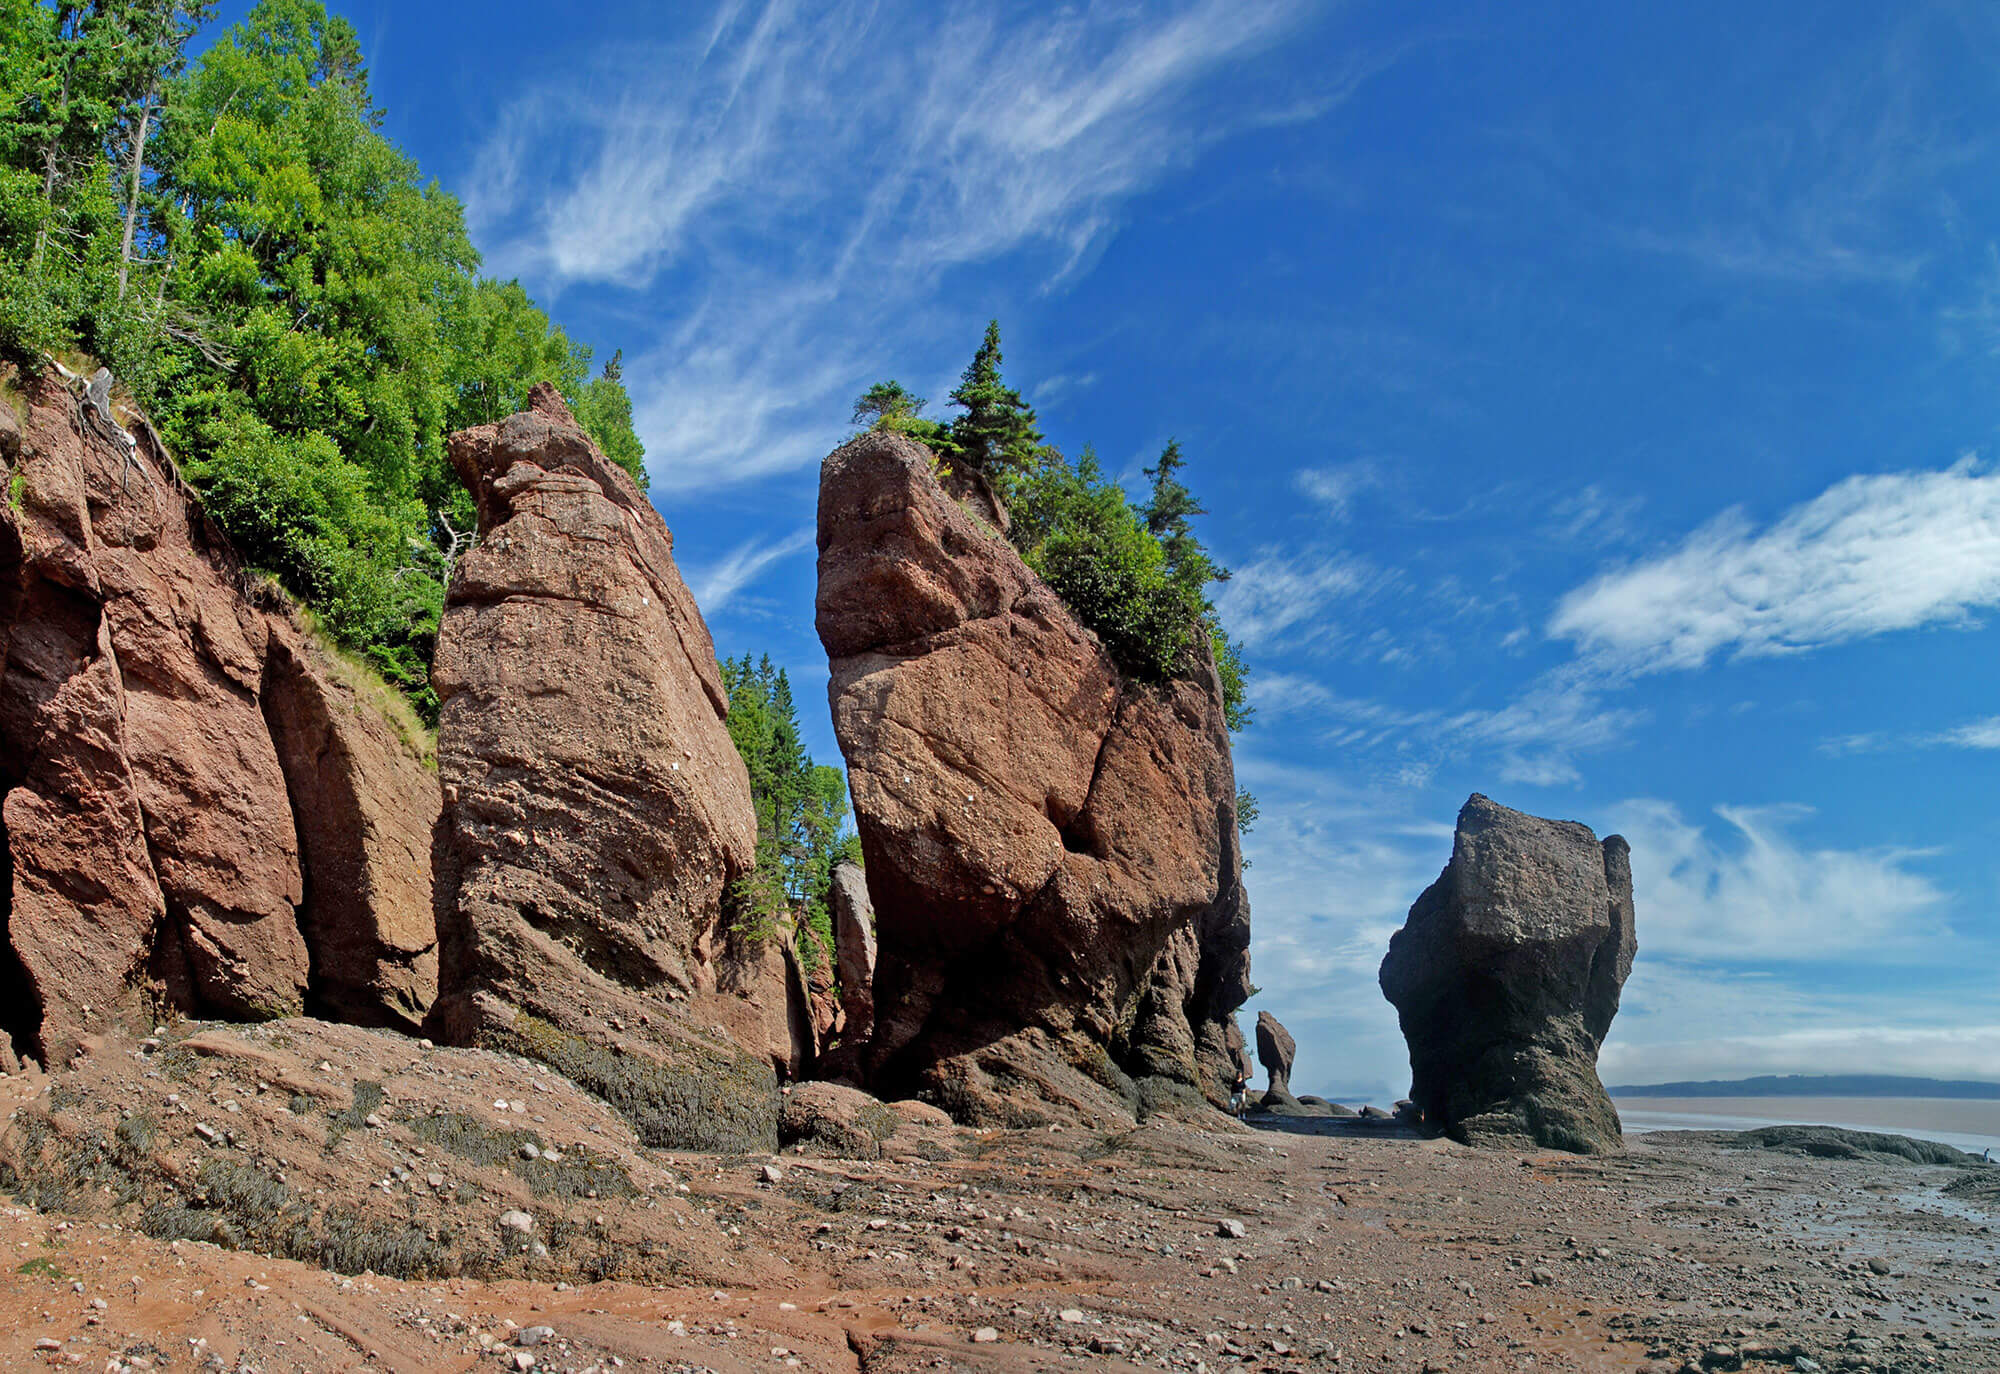 The Flower Pot Formations Of Hopewell Rocks On The Bay Of Fundy, New Brunswick, Canadian Splash